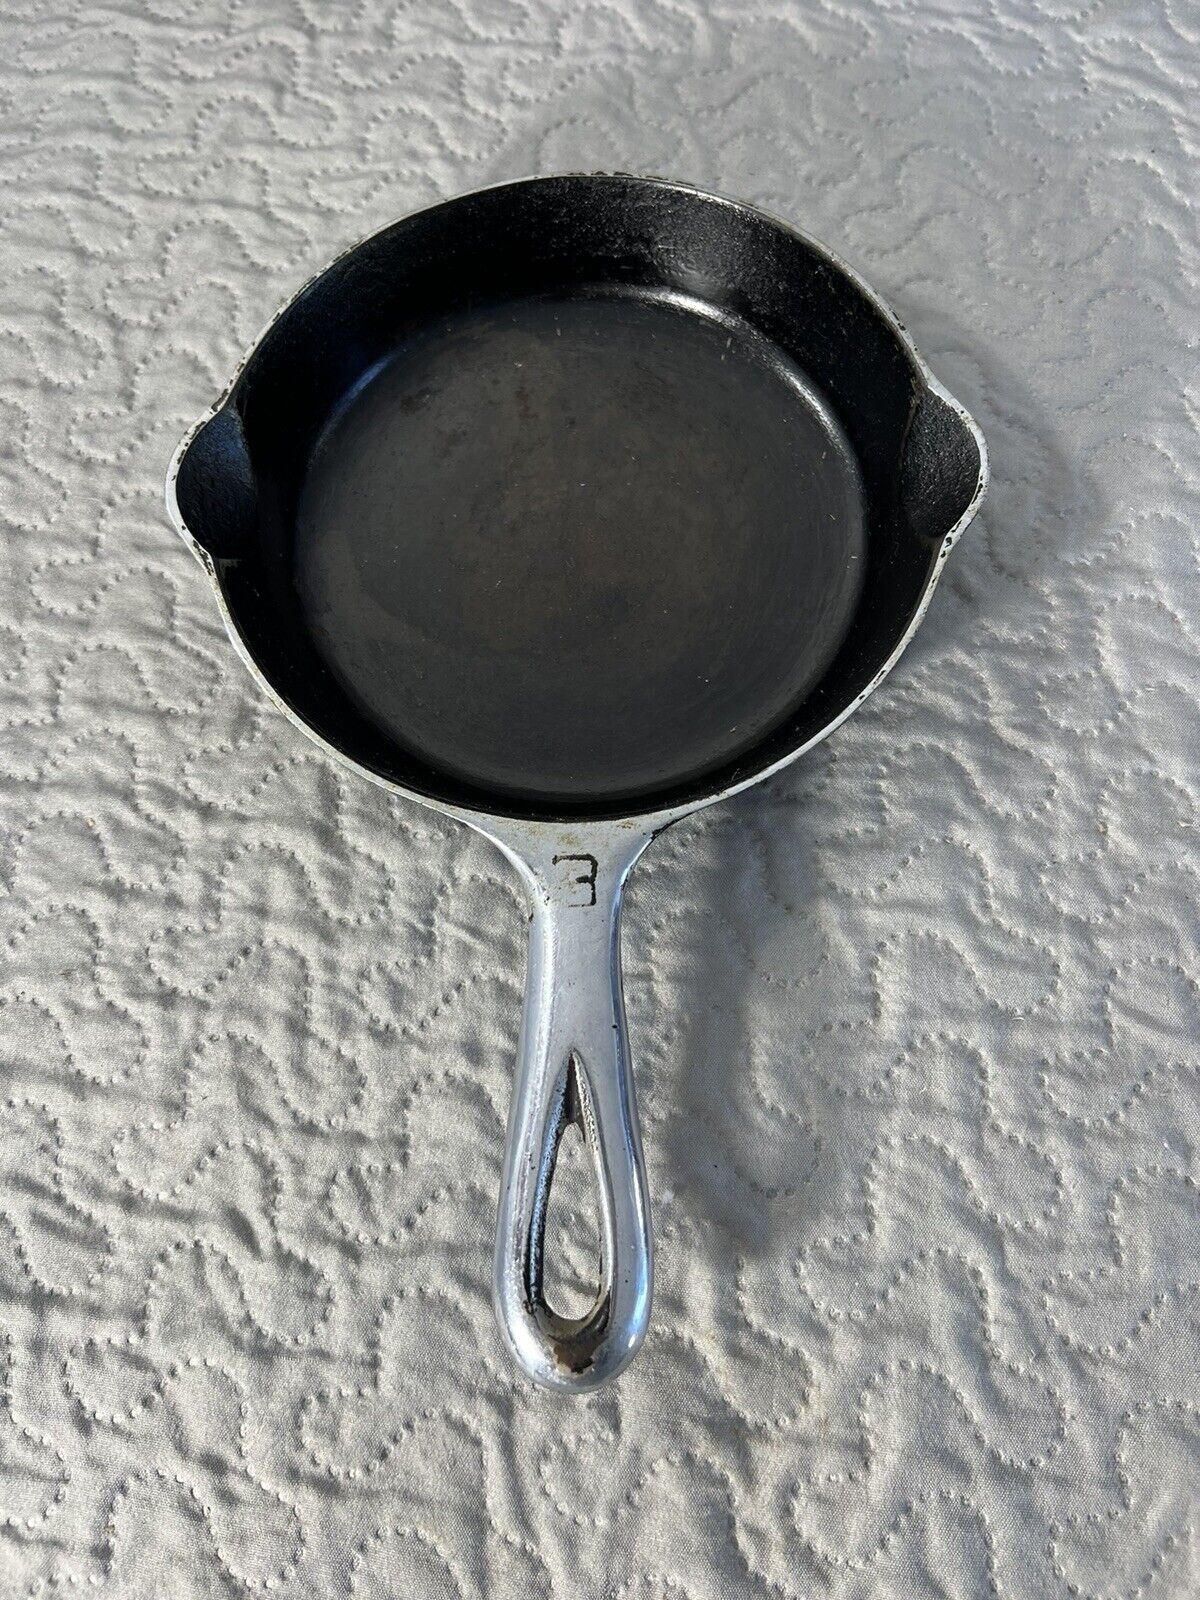 Griswold Cast Iron Skillet No. 3 Small